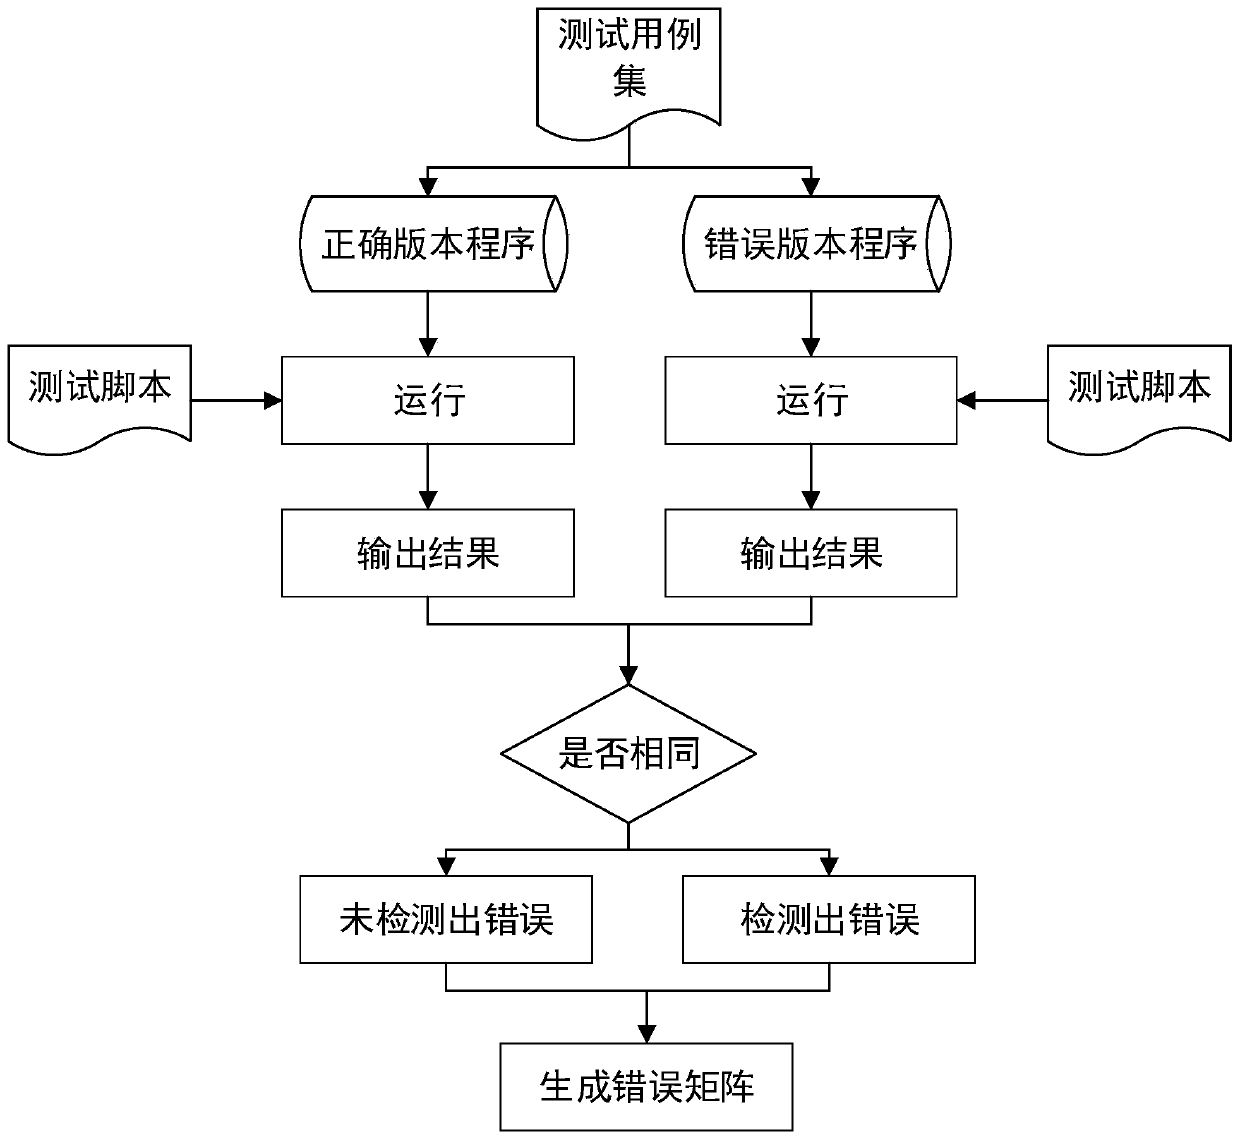 Code and combination coverage-based test case priority ranking method and test system